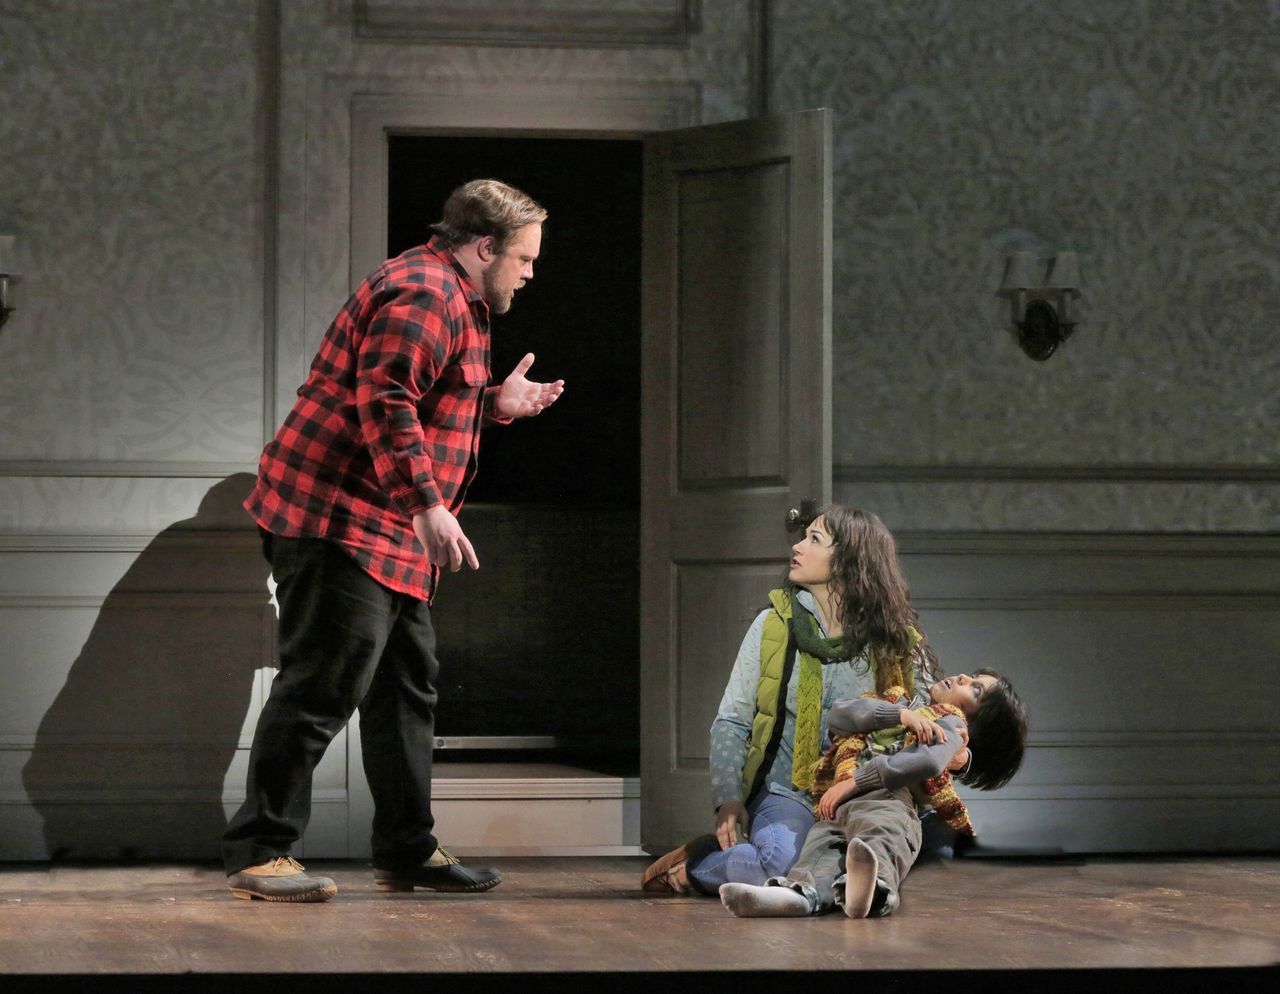 From left, Brian Mulligan as Jack Torrance, Kelly Kaduce as Wendy Torrance and Alejandro Vega as Danny Torrance perform in the Minnesota Opera New Works Initiative production of Stephen King’s “The Shining.”